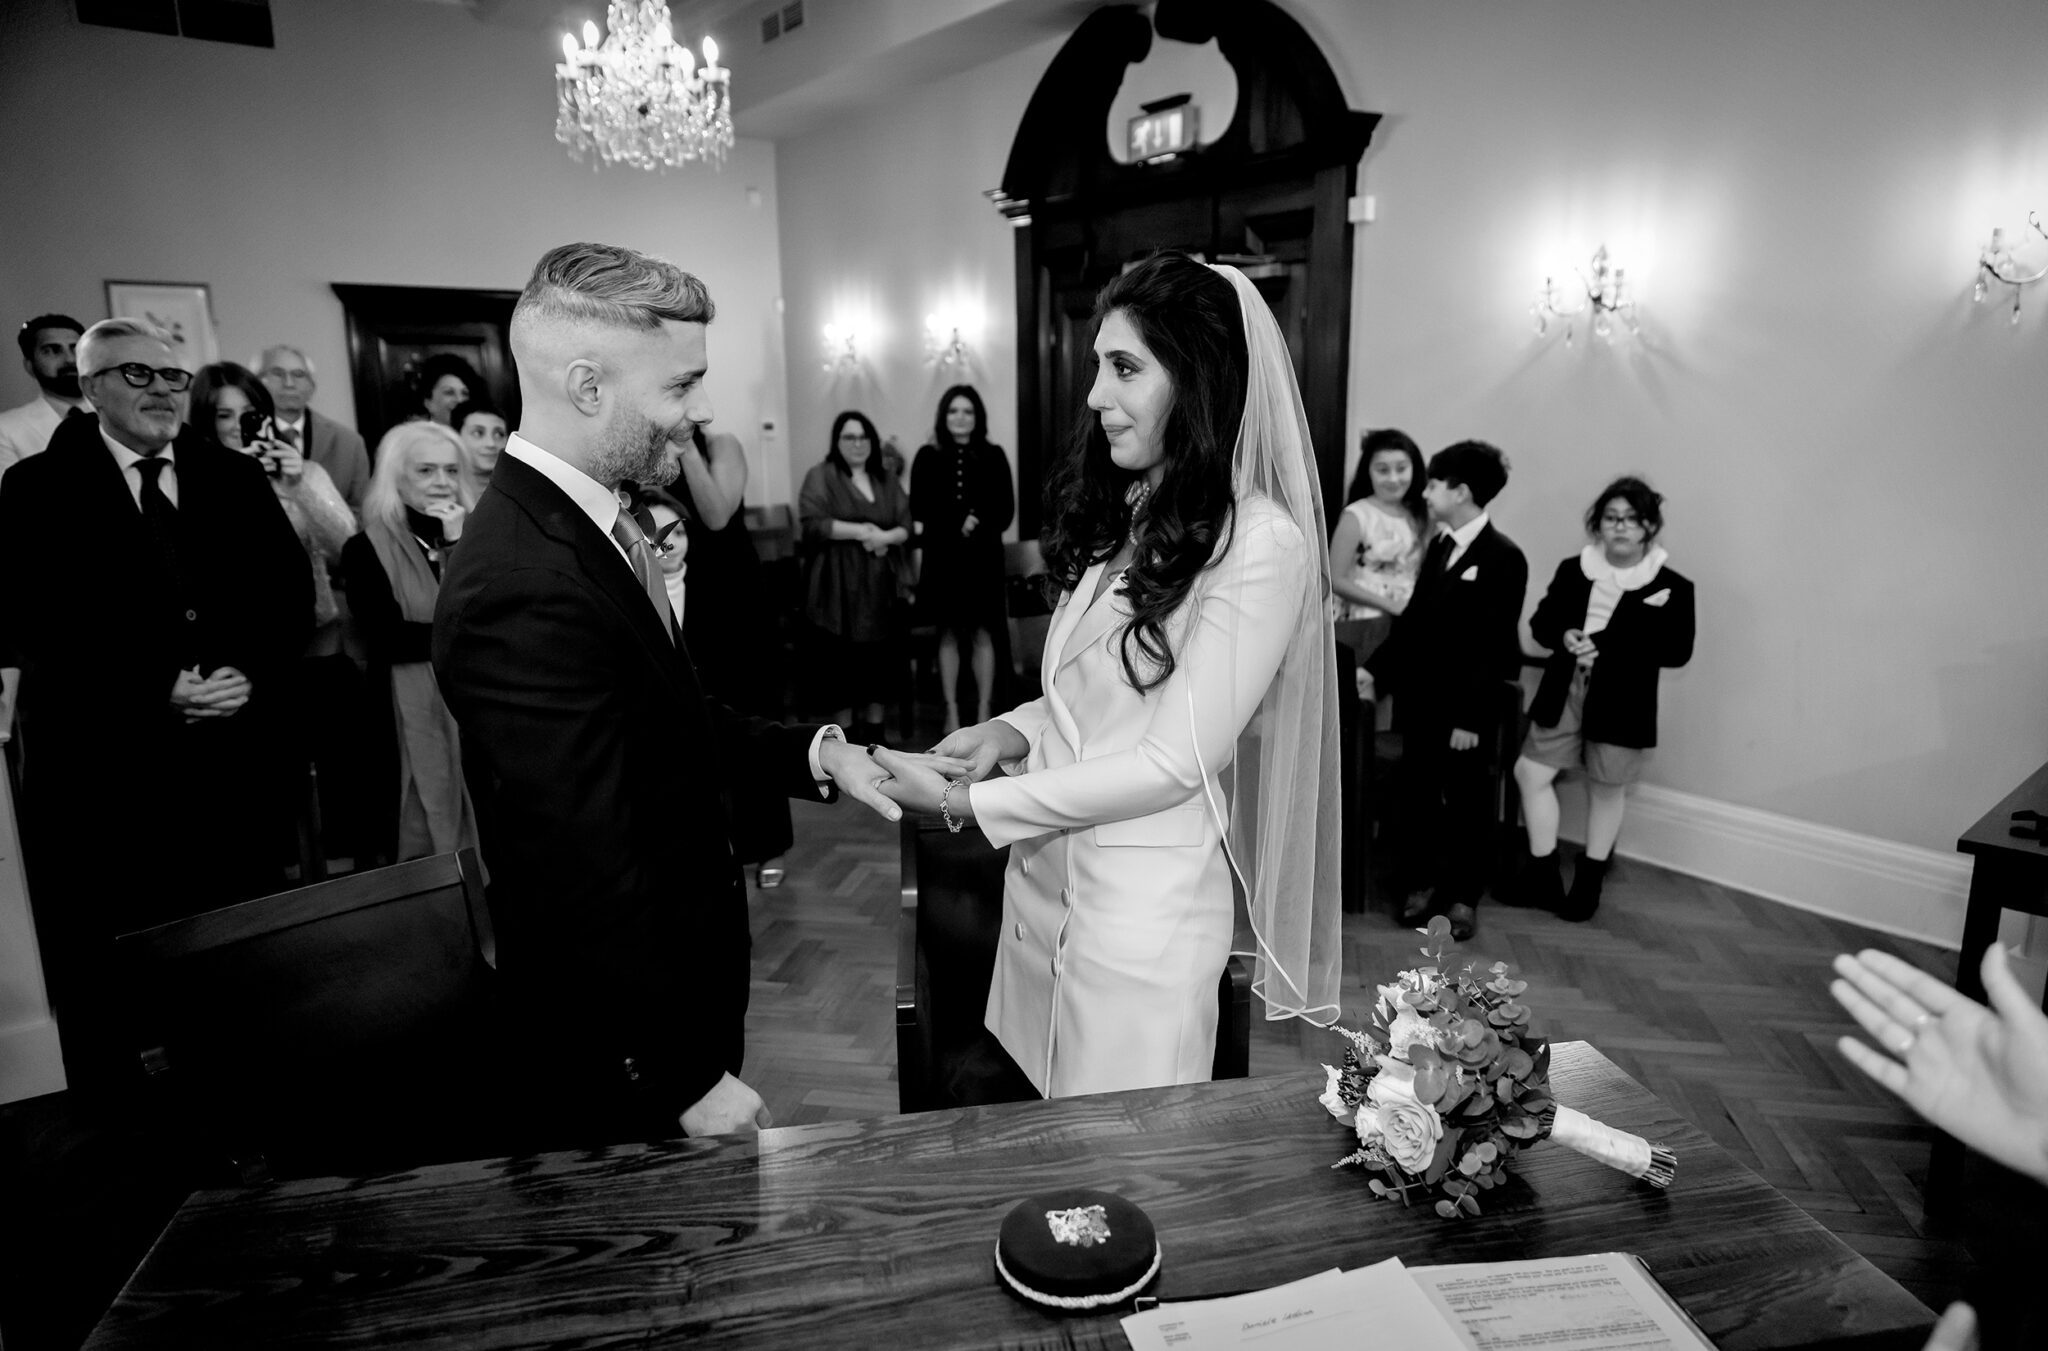 Exchange of rings at Chelsea Old Town Hall wedding ceremony two